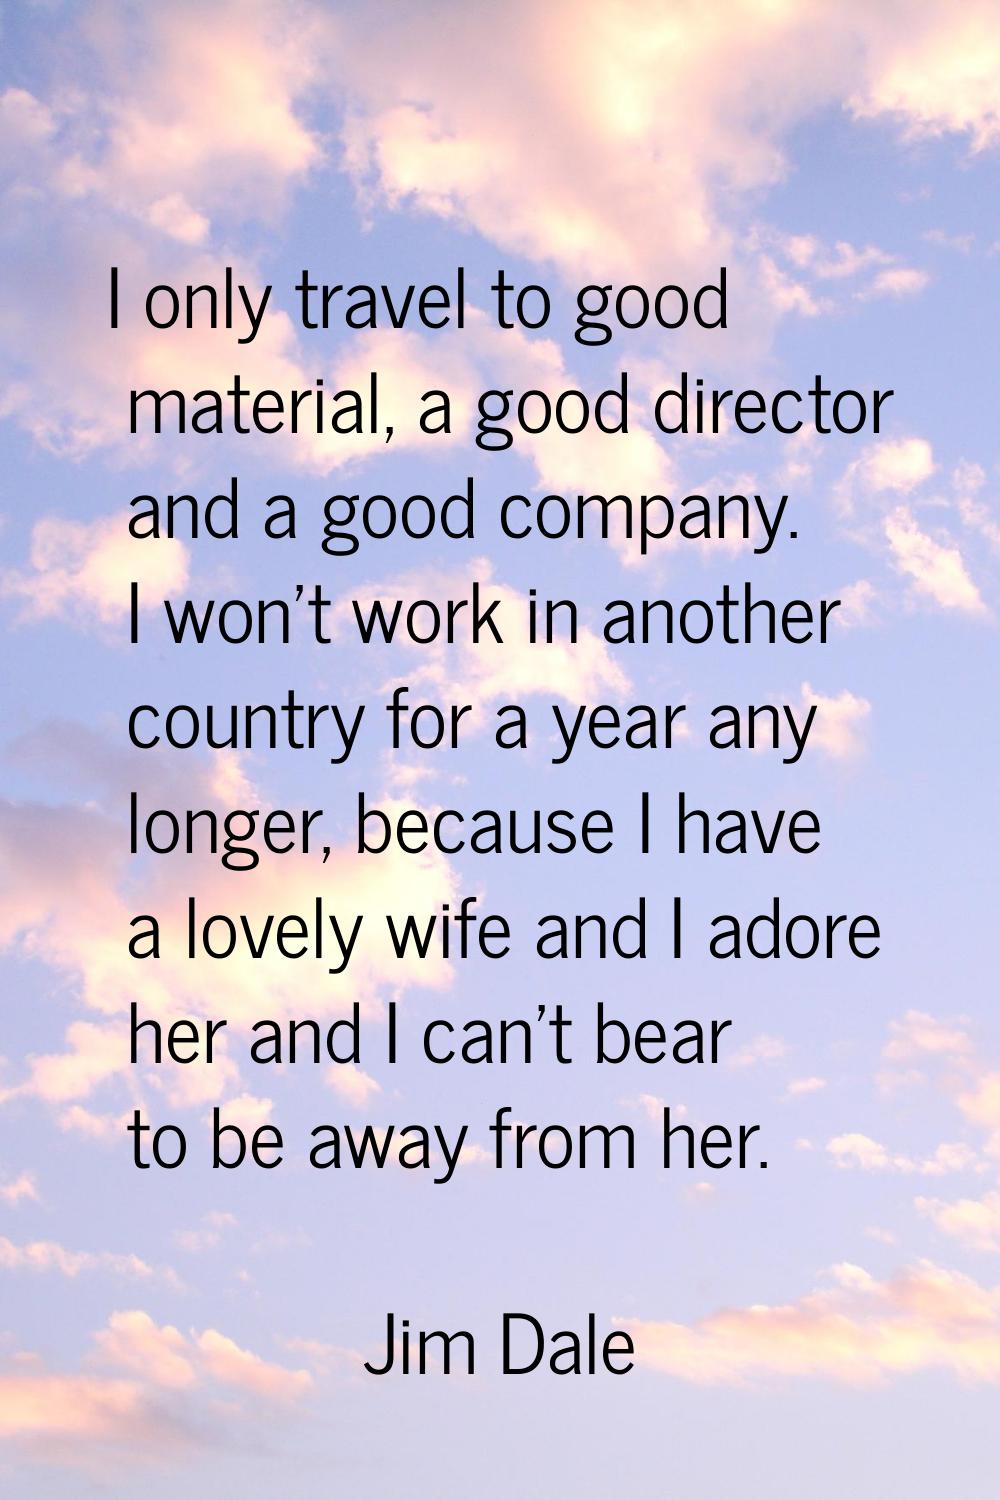 I only travel to good material, a good director and a good company. I won't work in another country